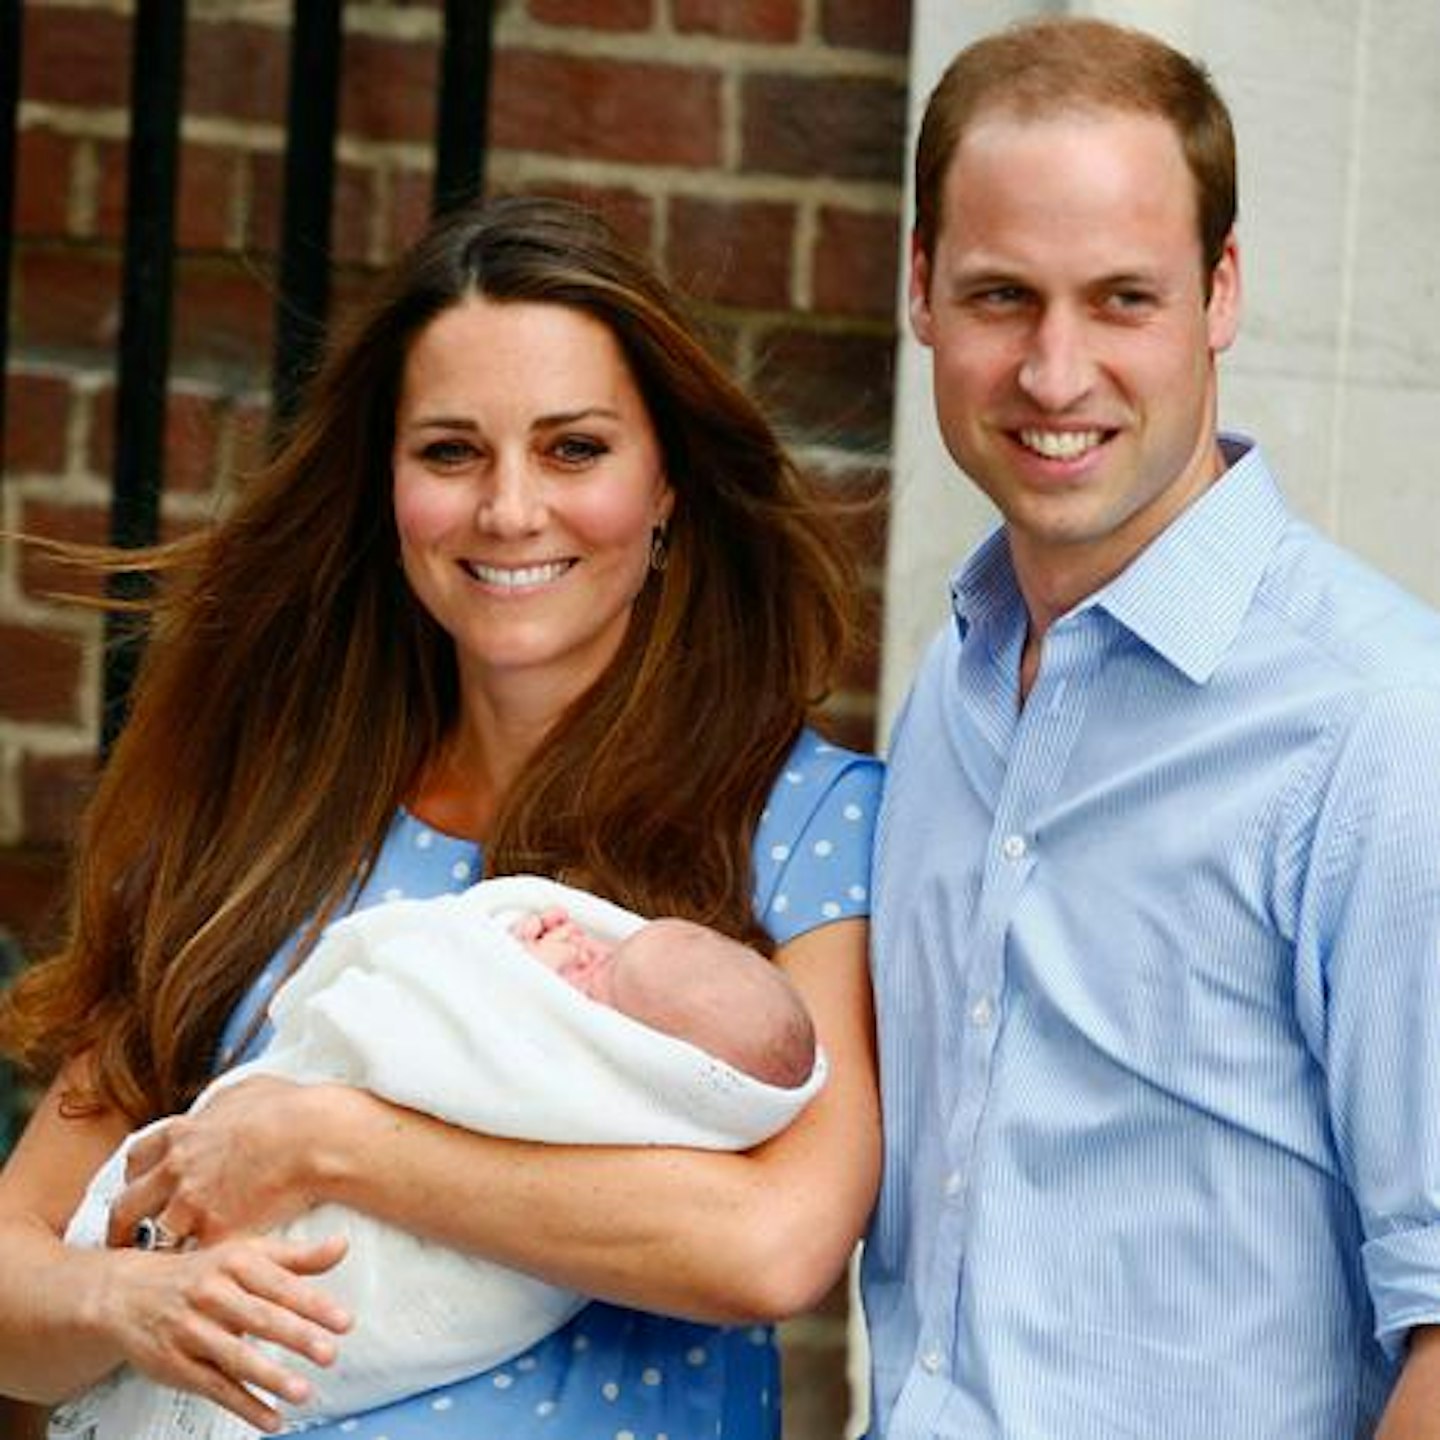 The interview is Prince William's first since becoming a father